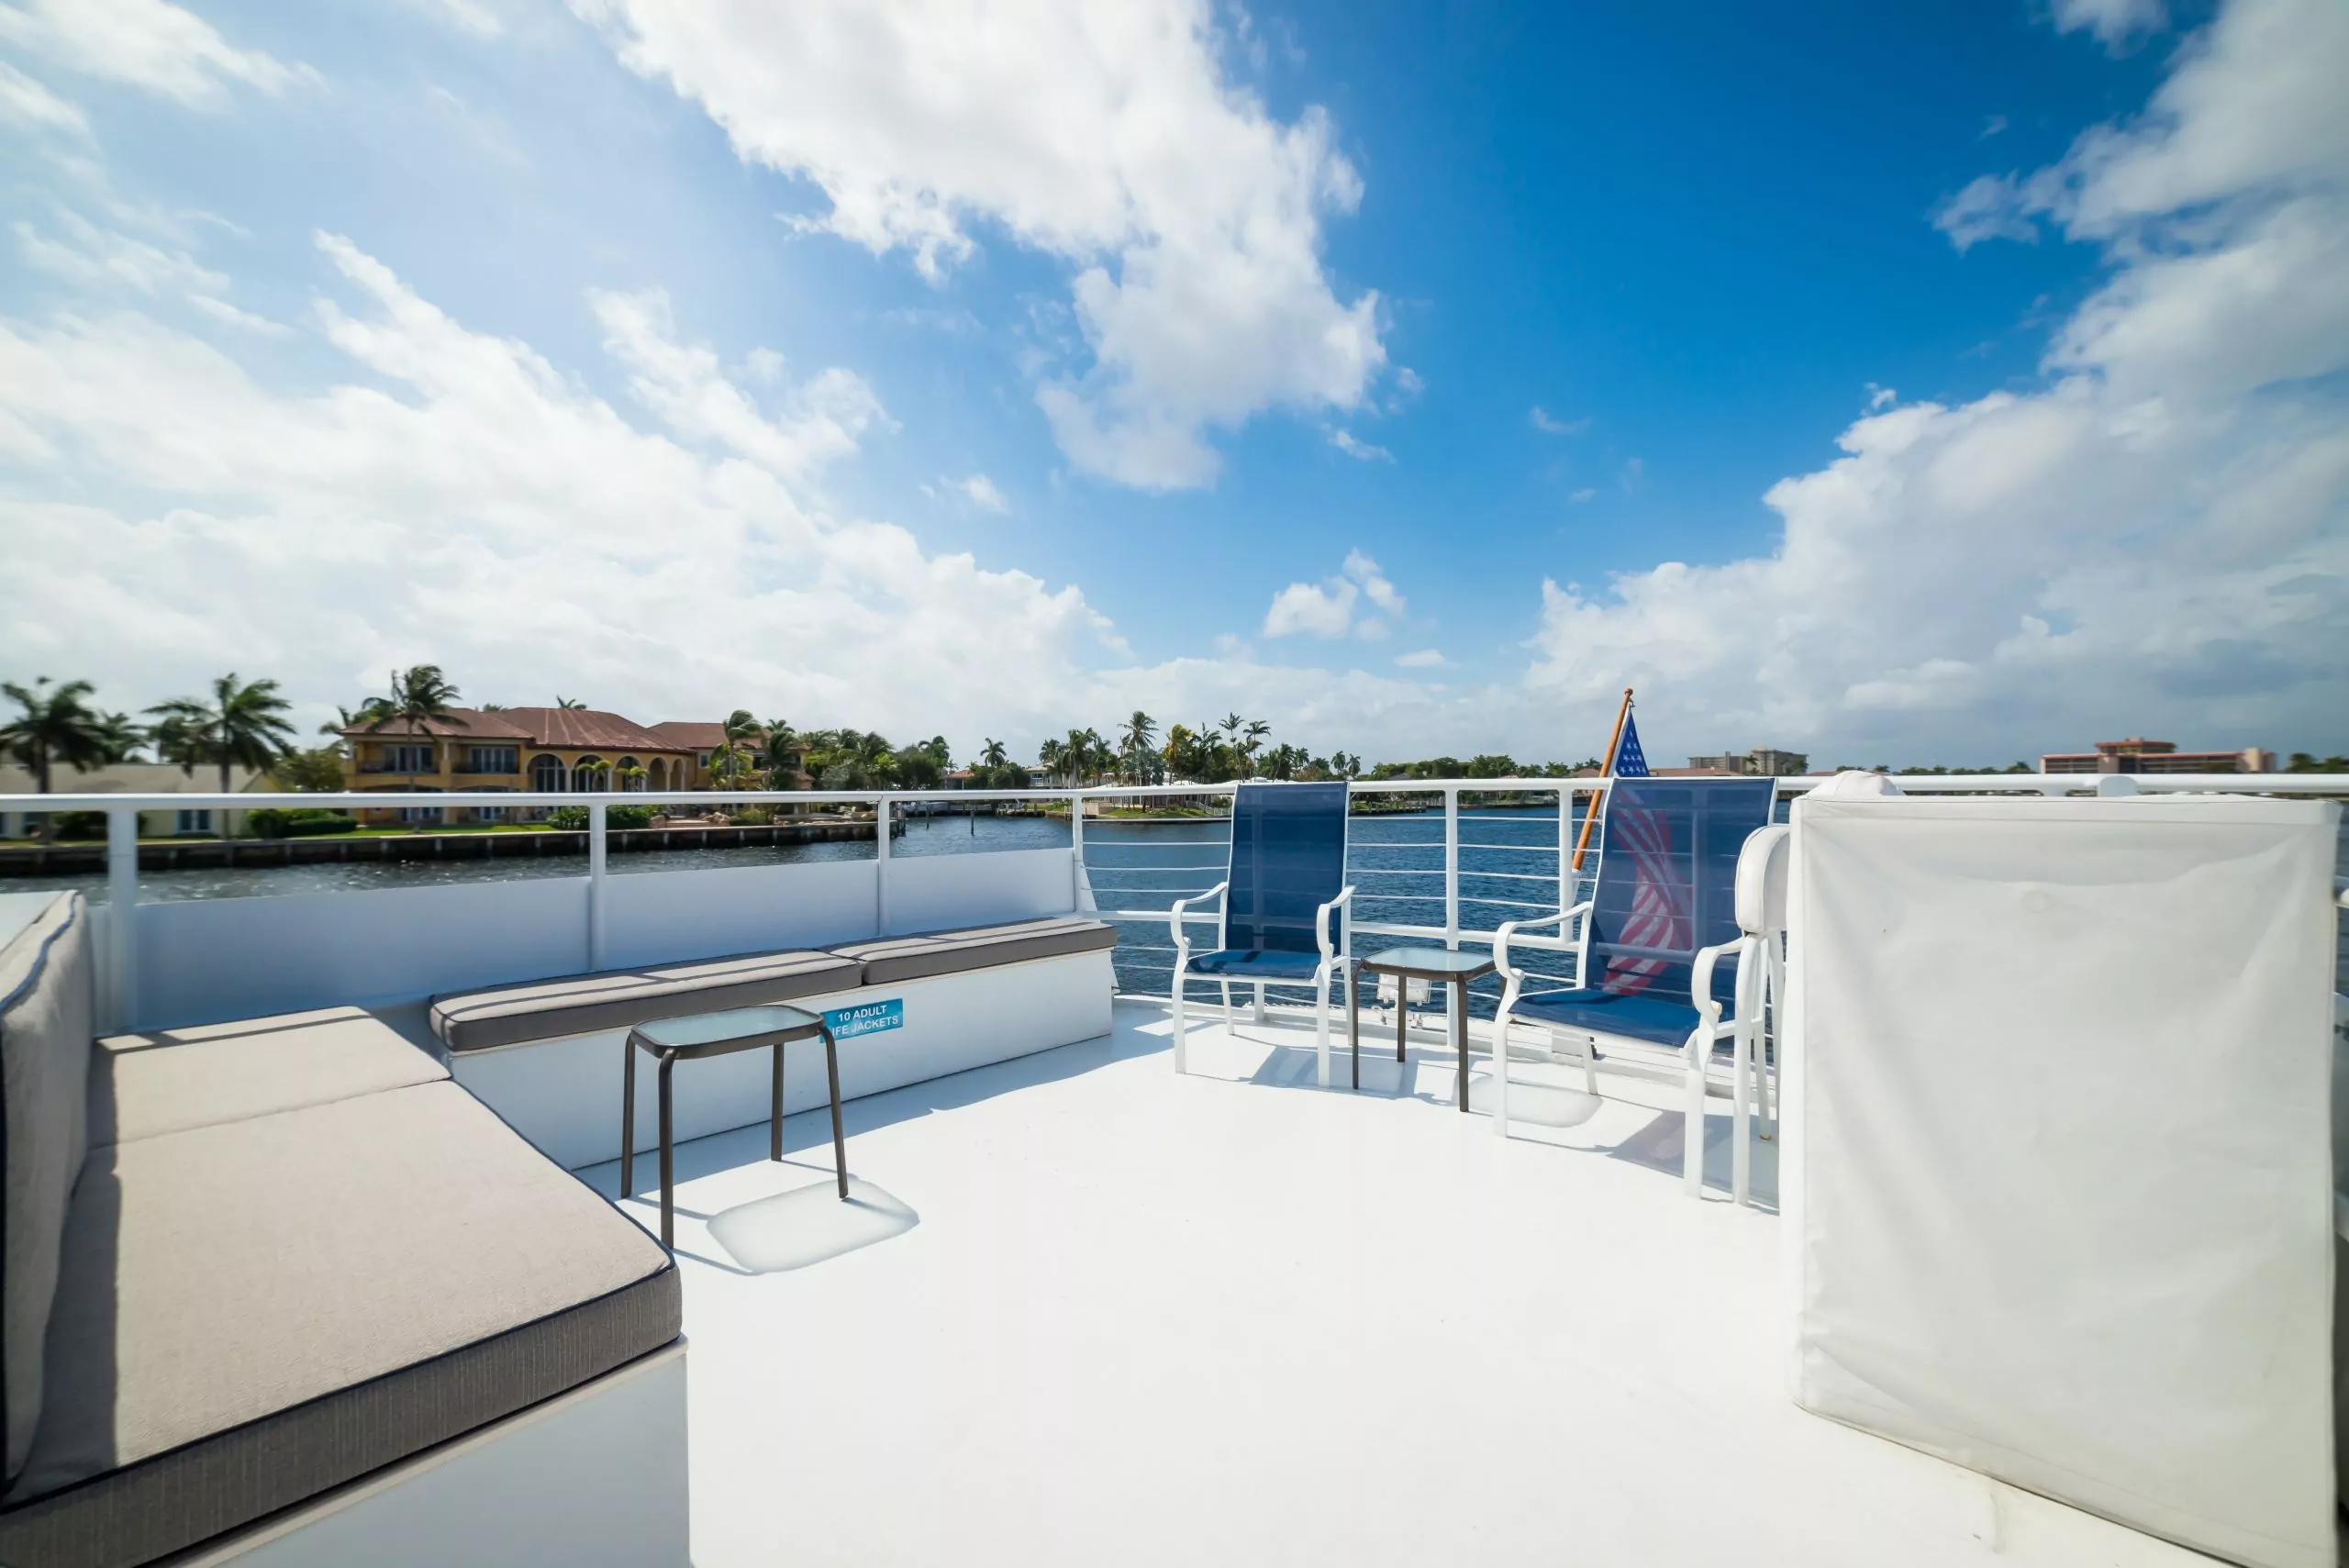 delray beach yacht charters private parties and rentals